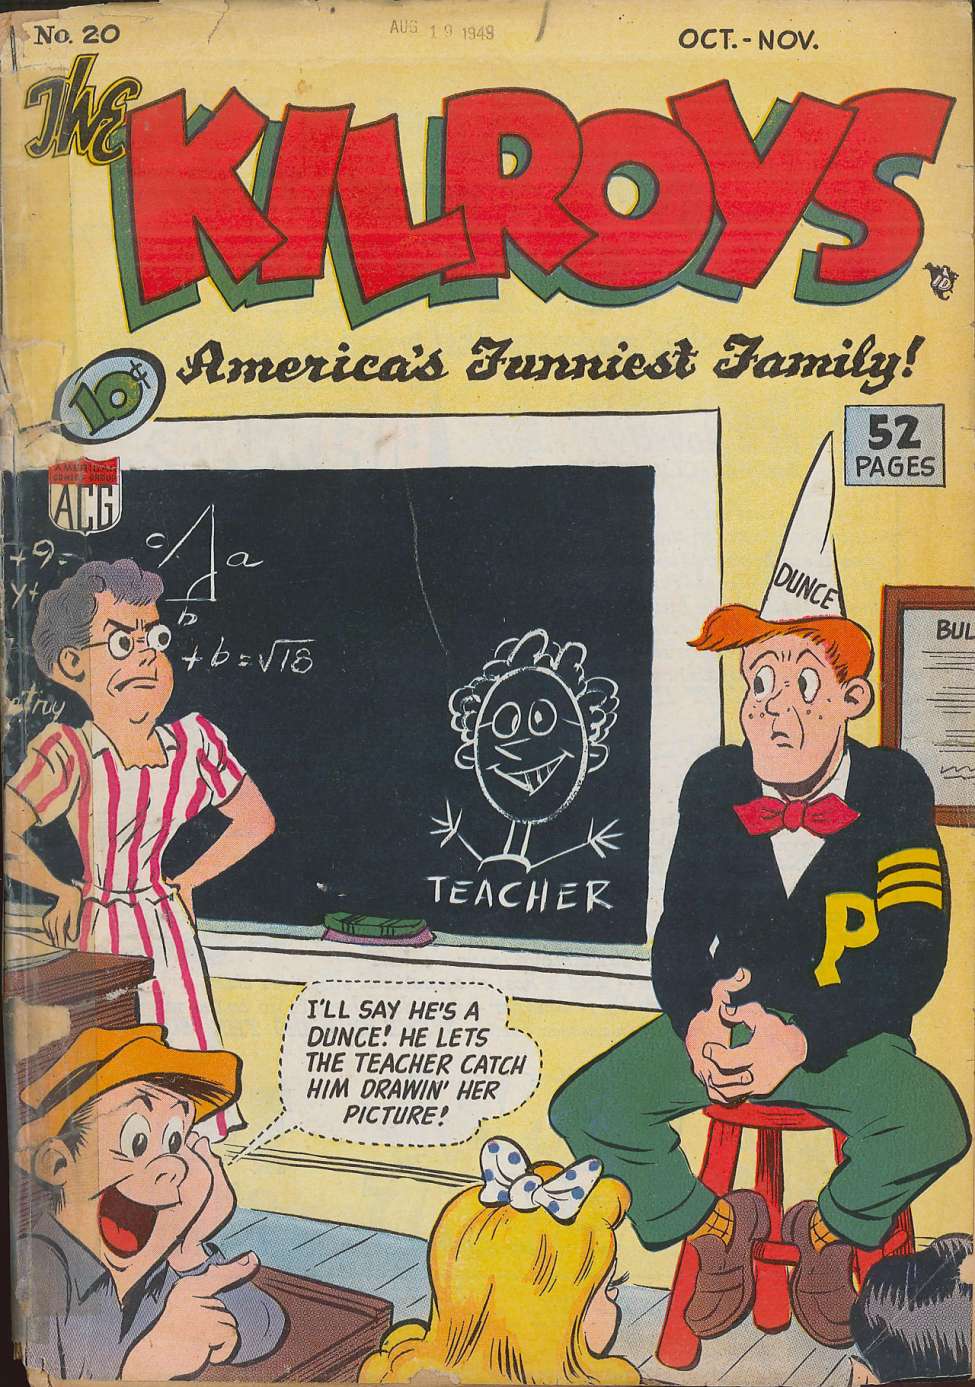 Comic Book Cover For The Kilroys 20